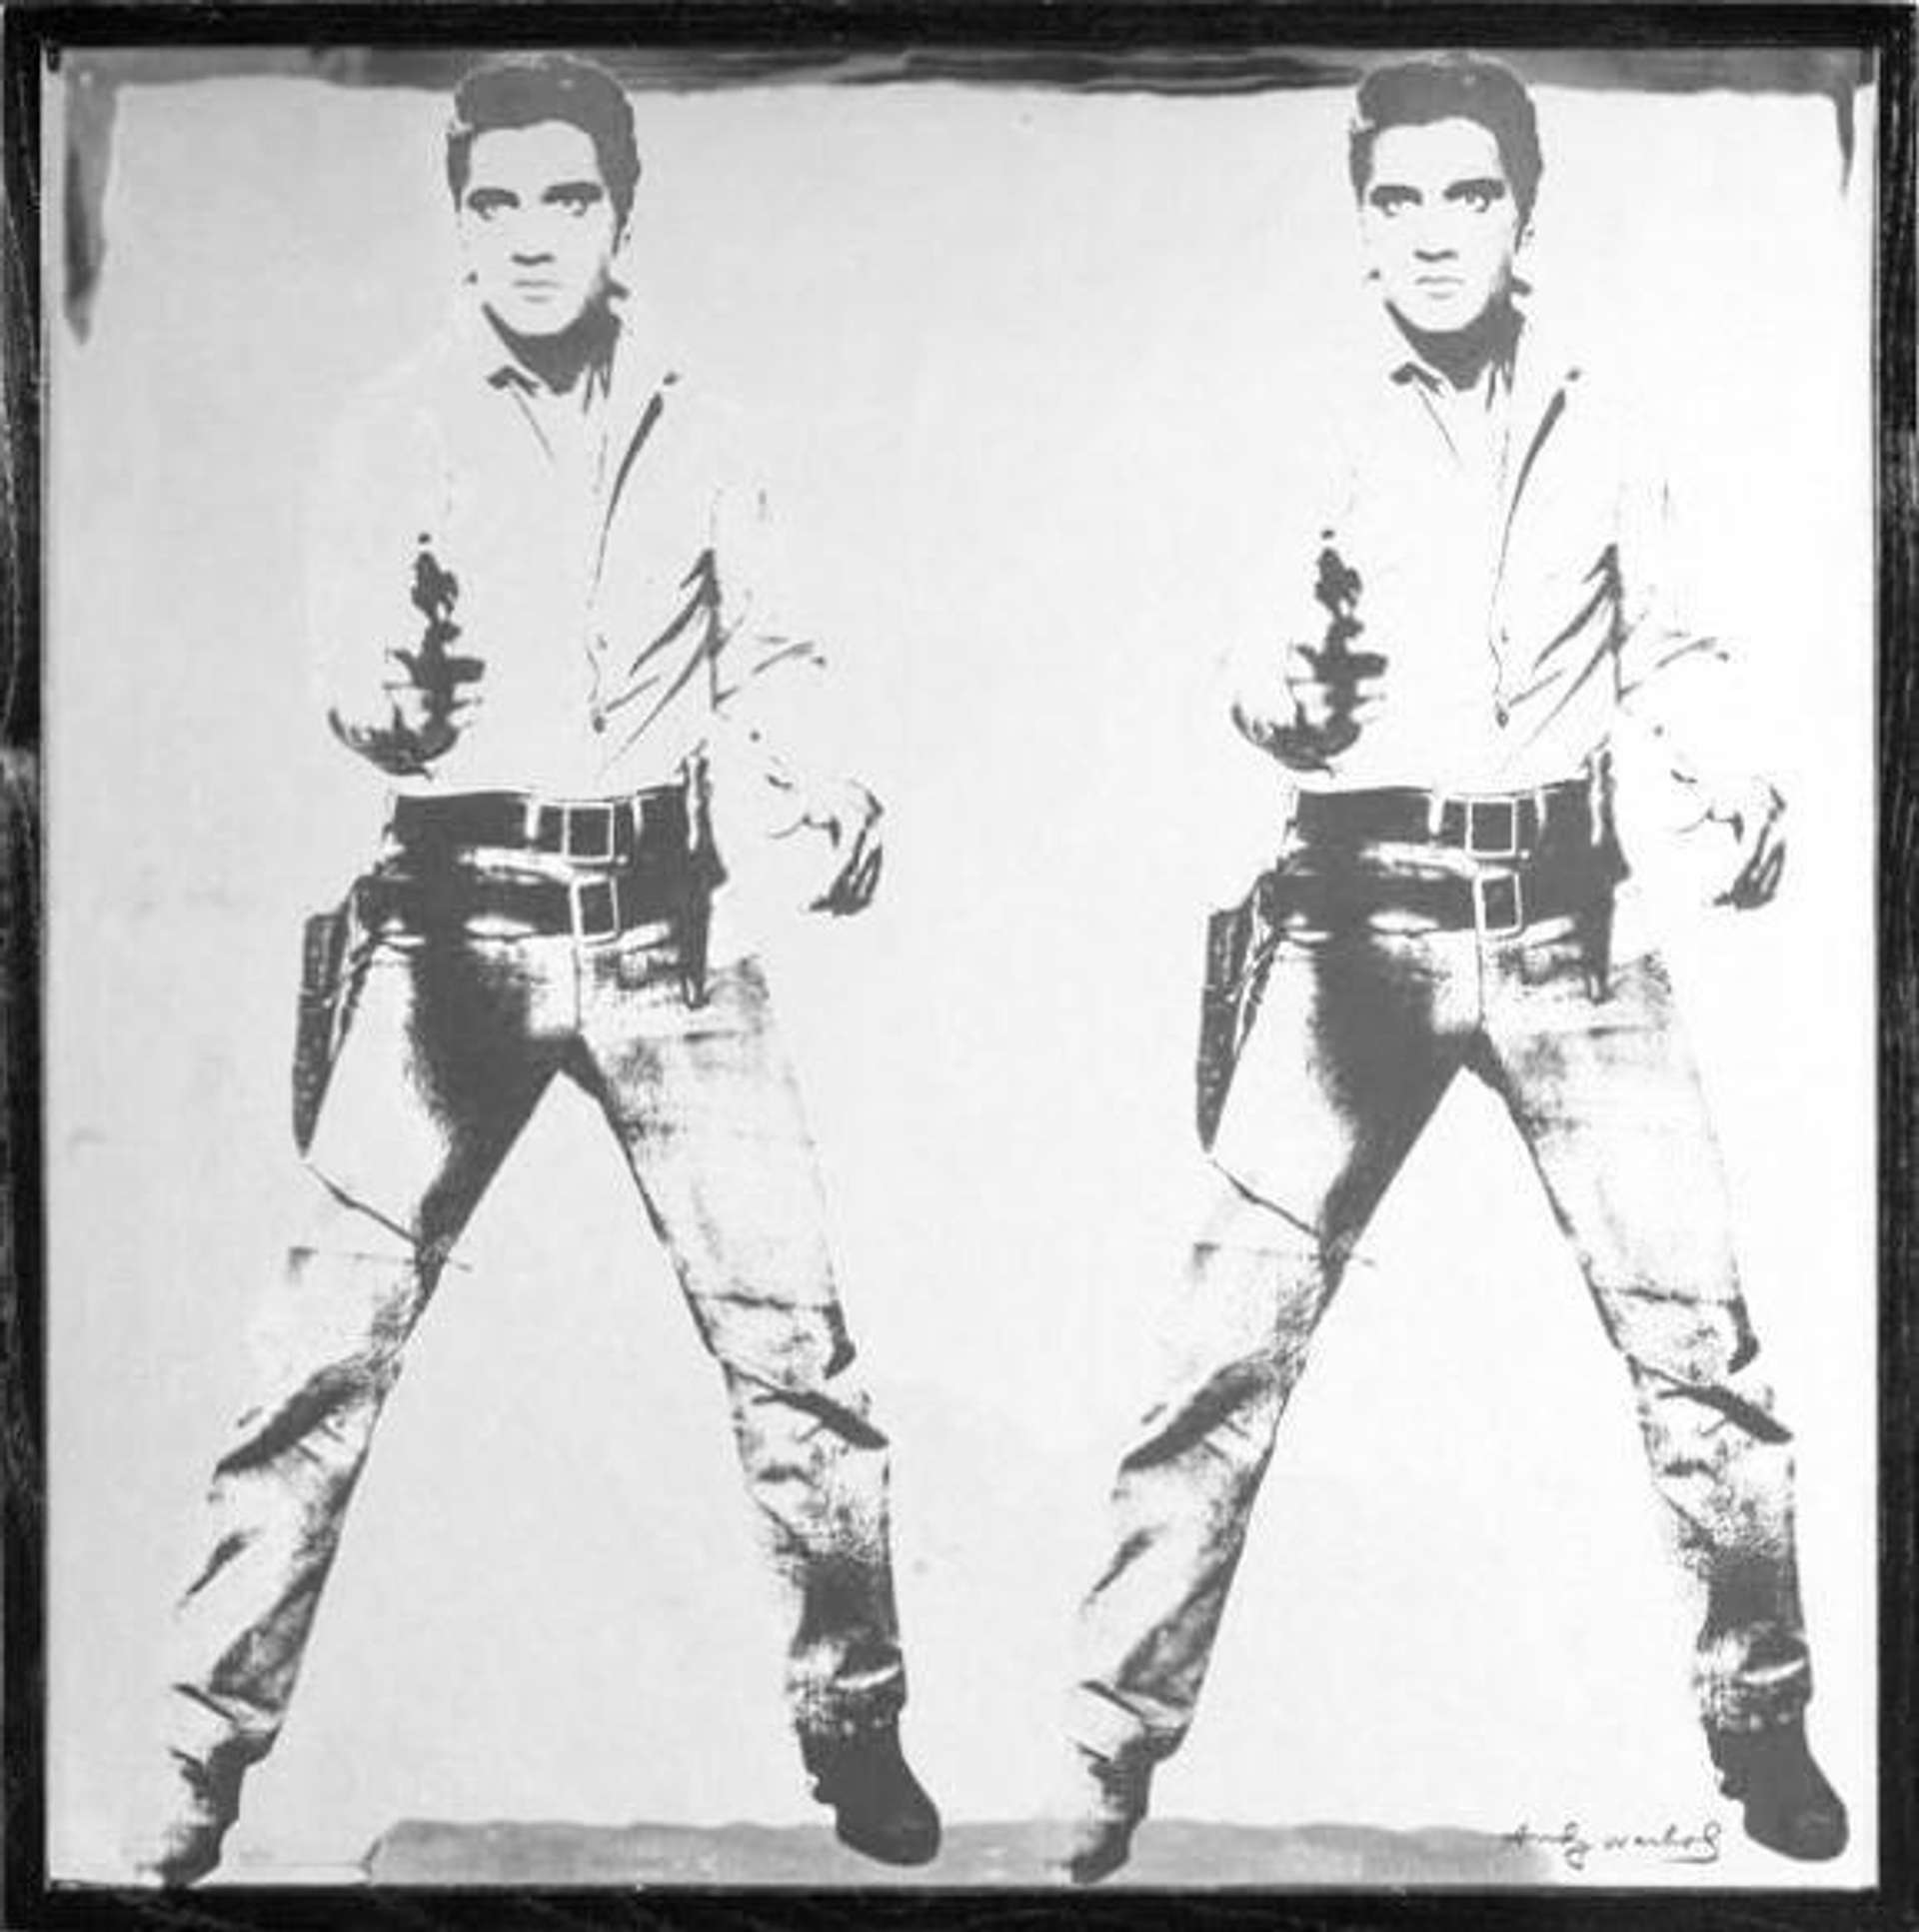 A screenprint by Andy Warhol of two Elvis figures side by side against a white background.